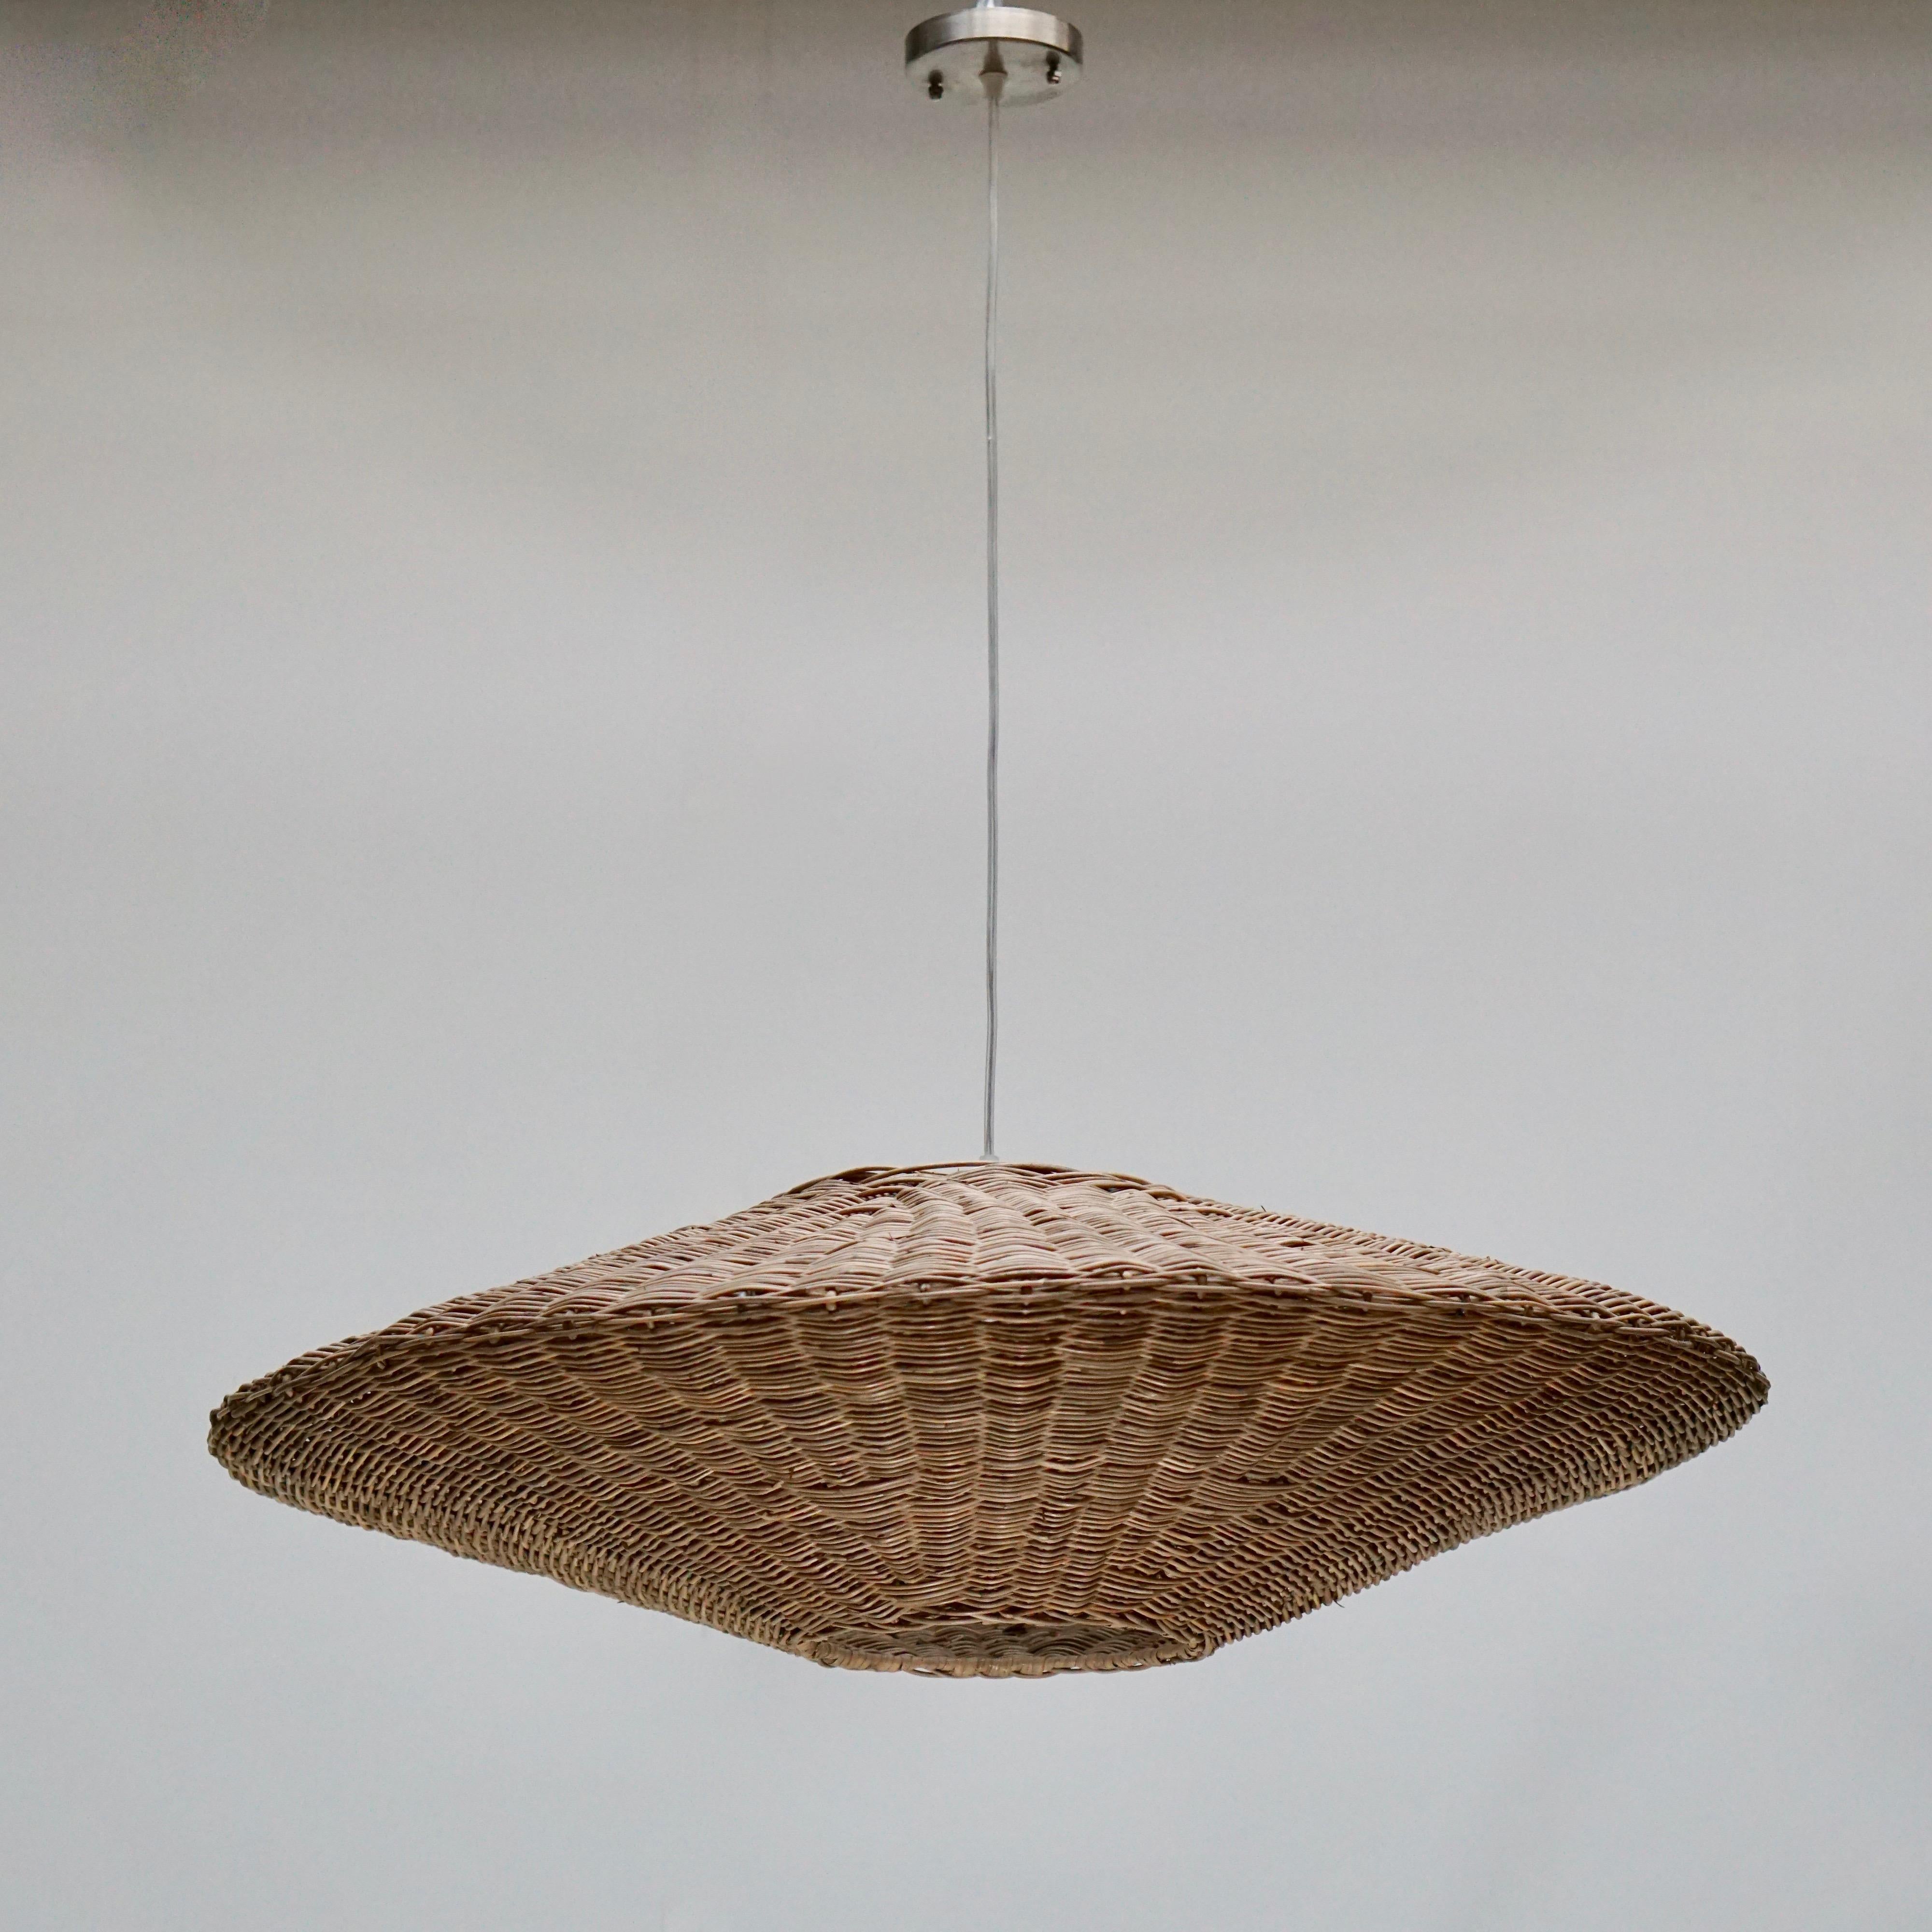 Large flogged cane rattan UFO ceiling light.
Measures: Diameter 82 cm.
Height fixture 24 cm.
Total height 135 cm.